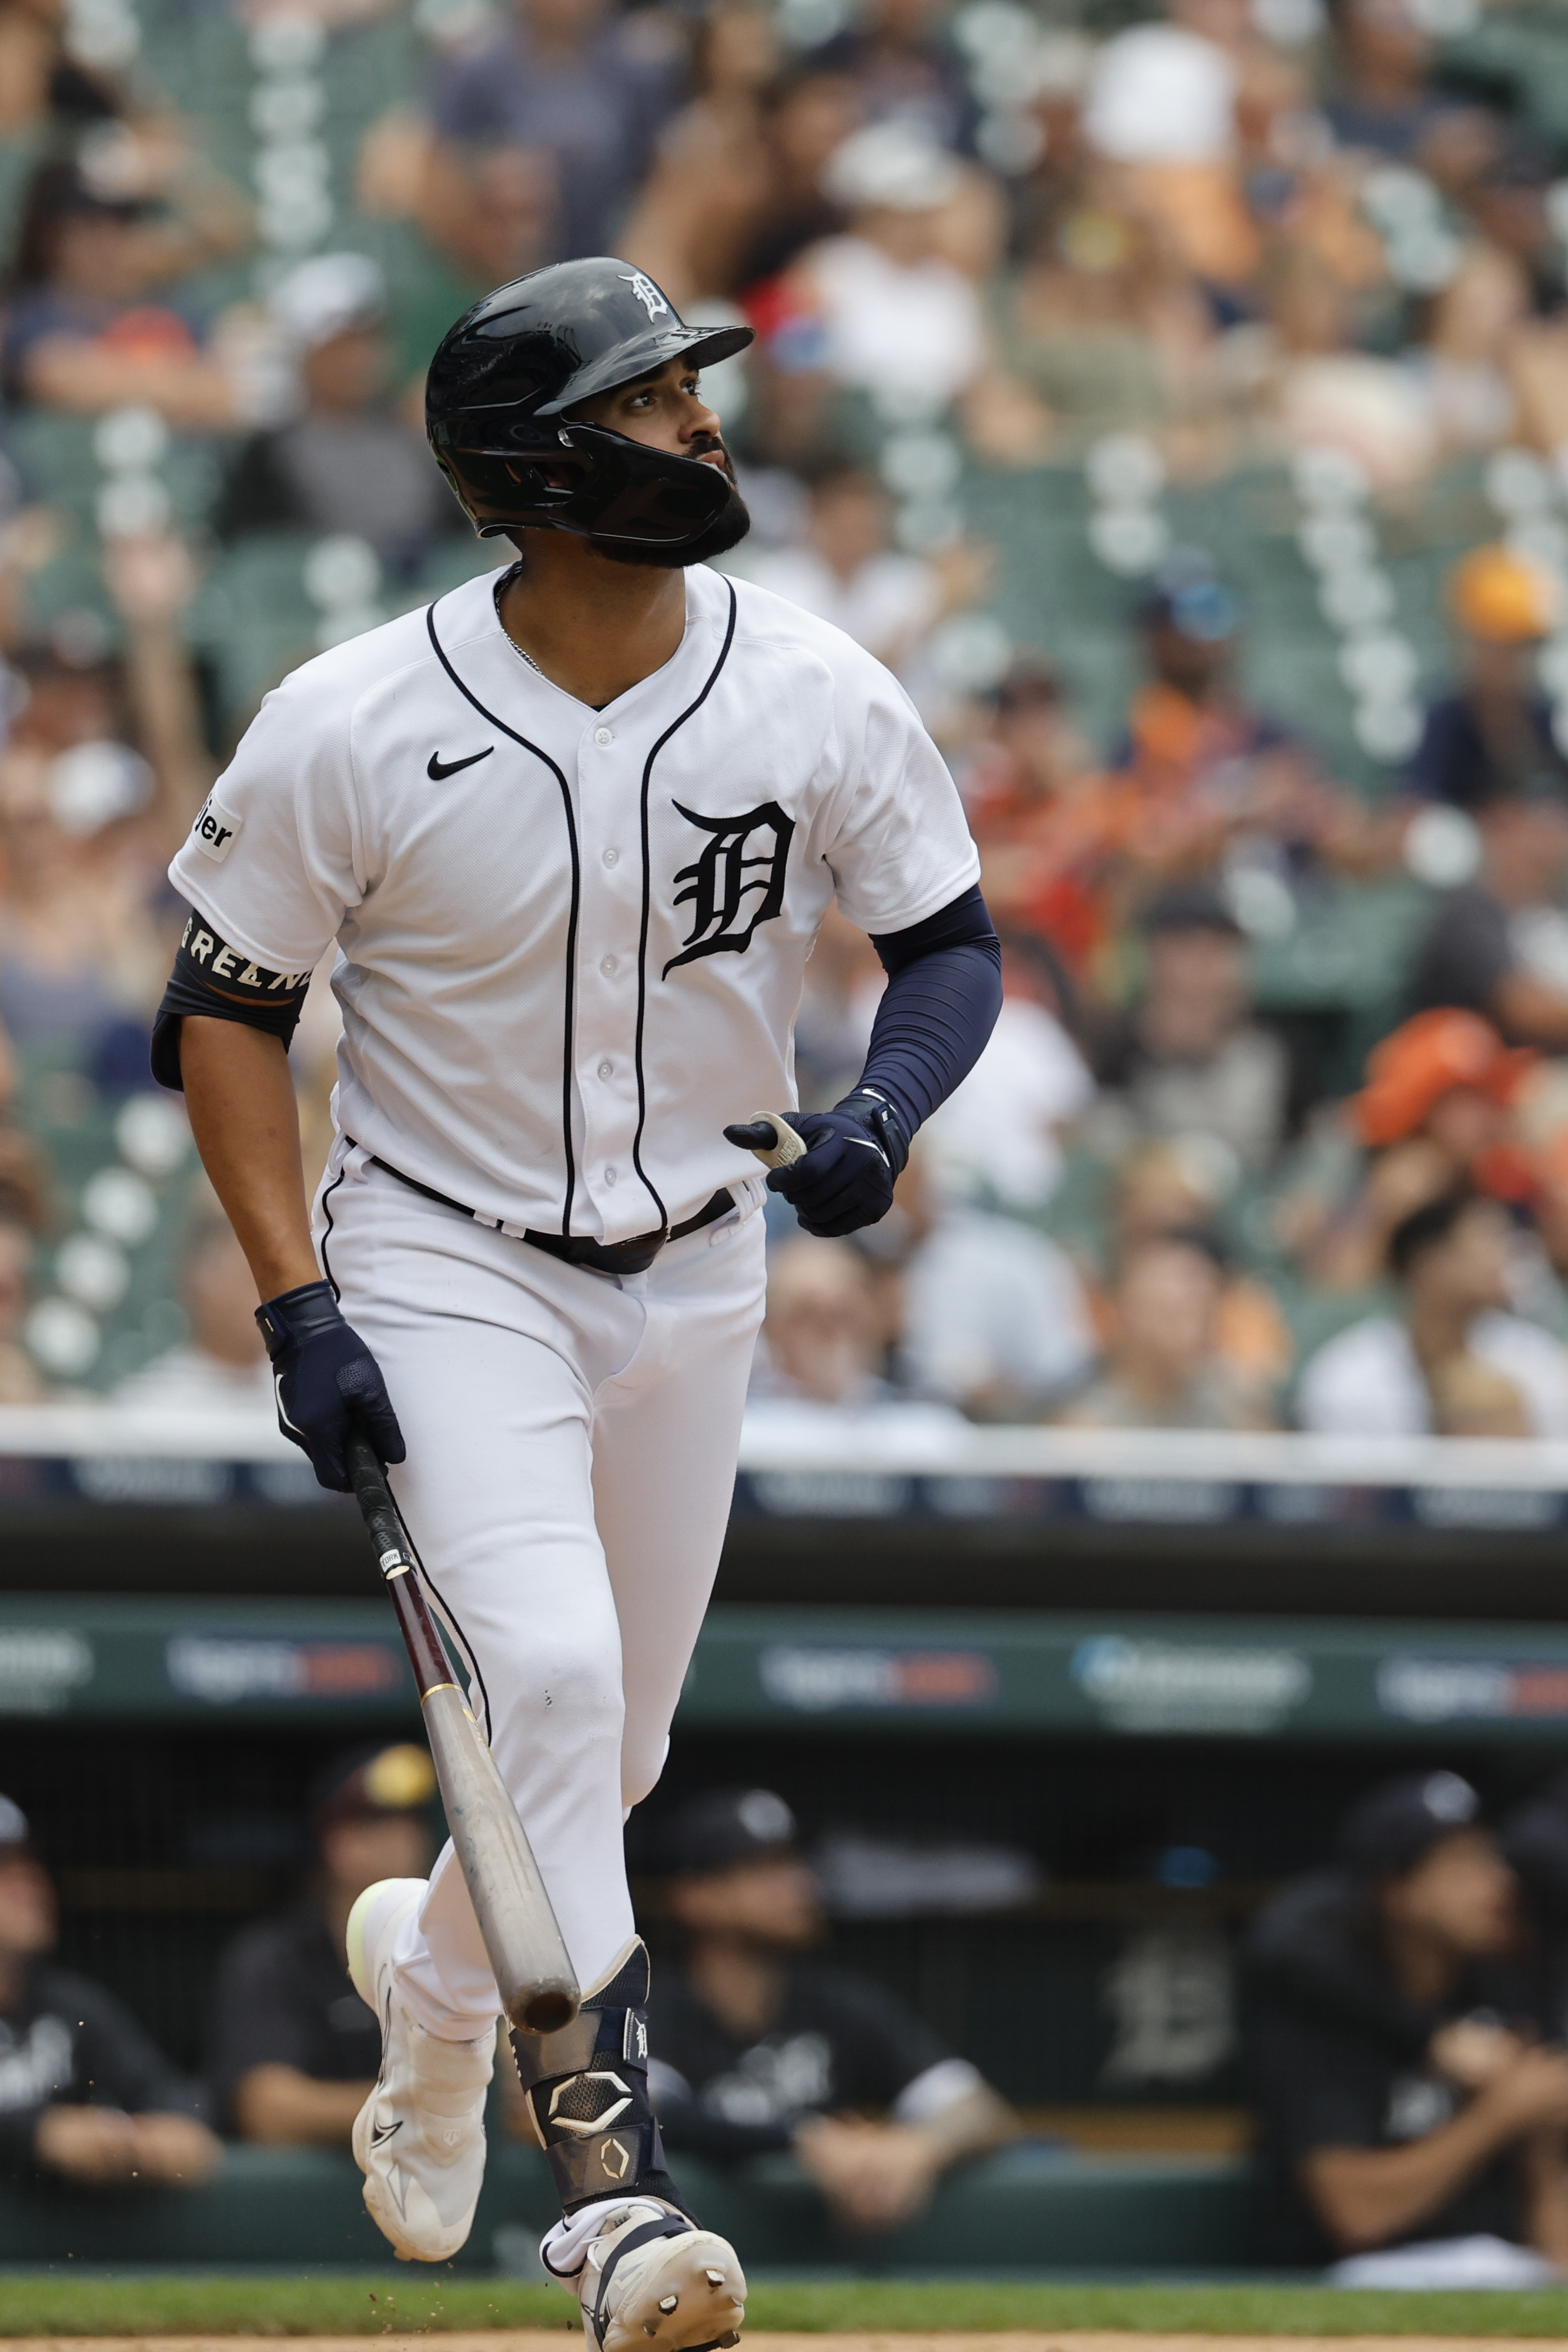 Reese Olson fuels Tigers past Twins